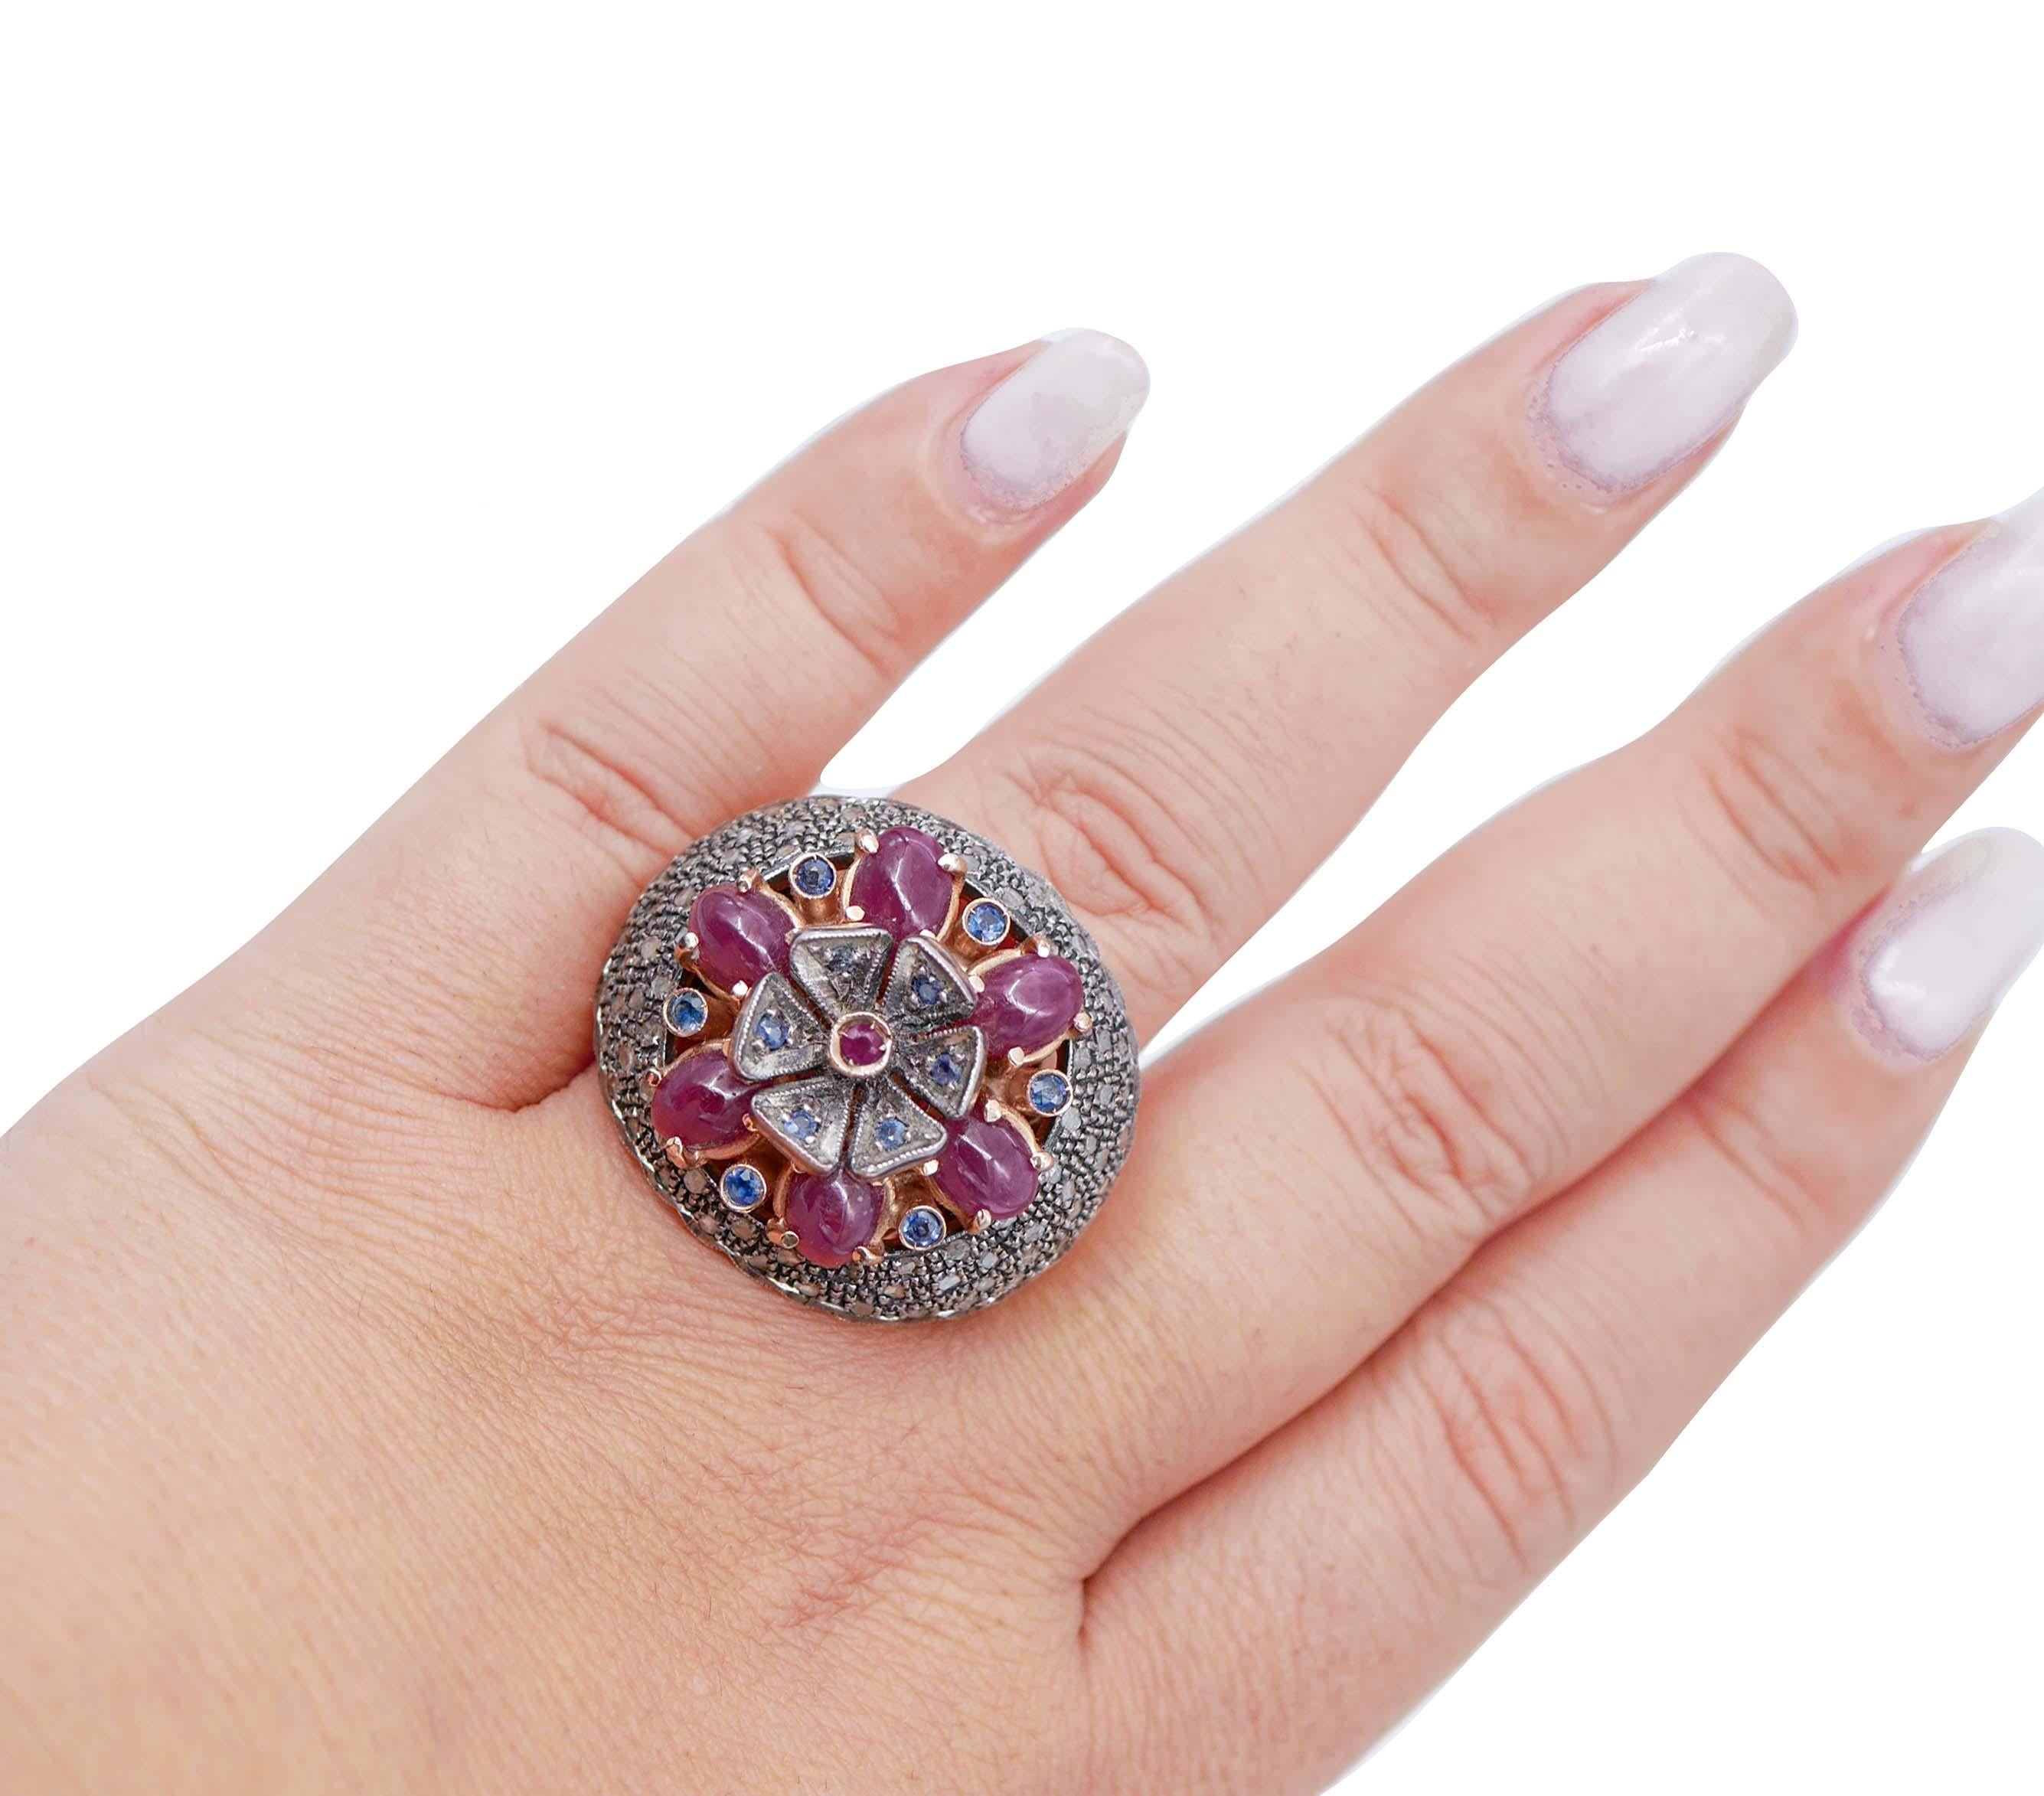 Rubies, Sapphires, Diamonds, 14 Karat Rose Gold and Silver Ring. In Good Condition For Sale In Marcianise, Marcianise (CE)